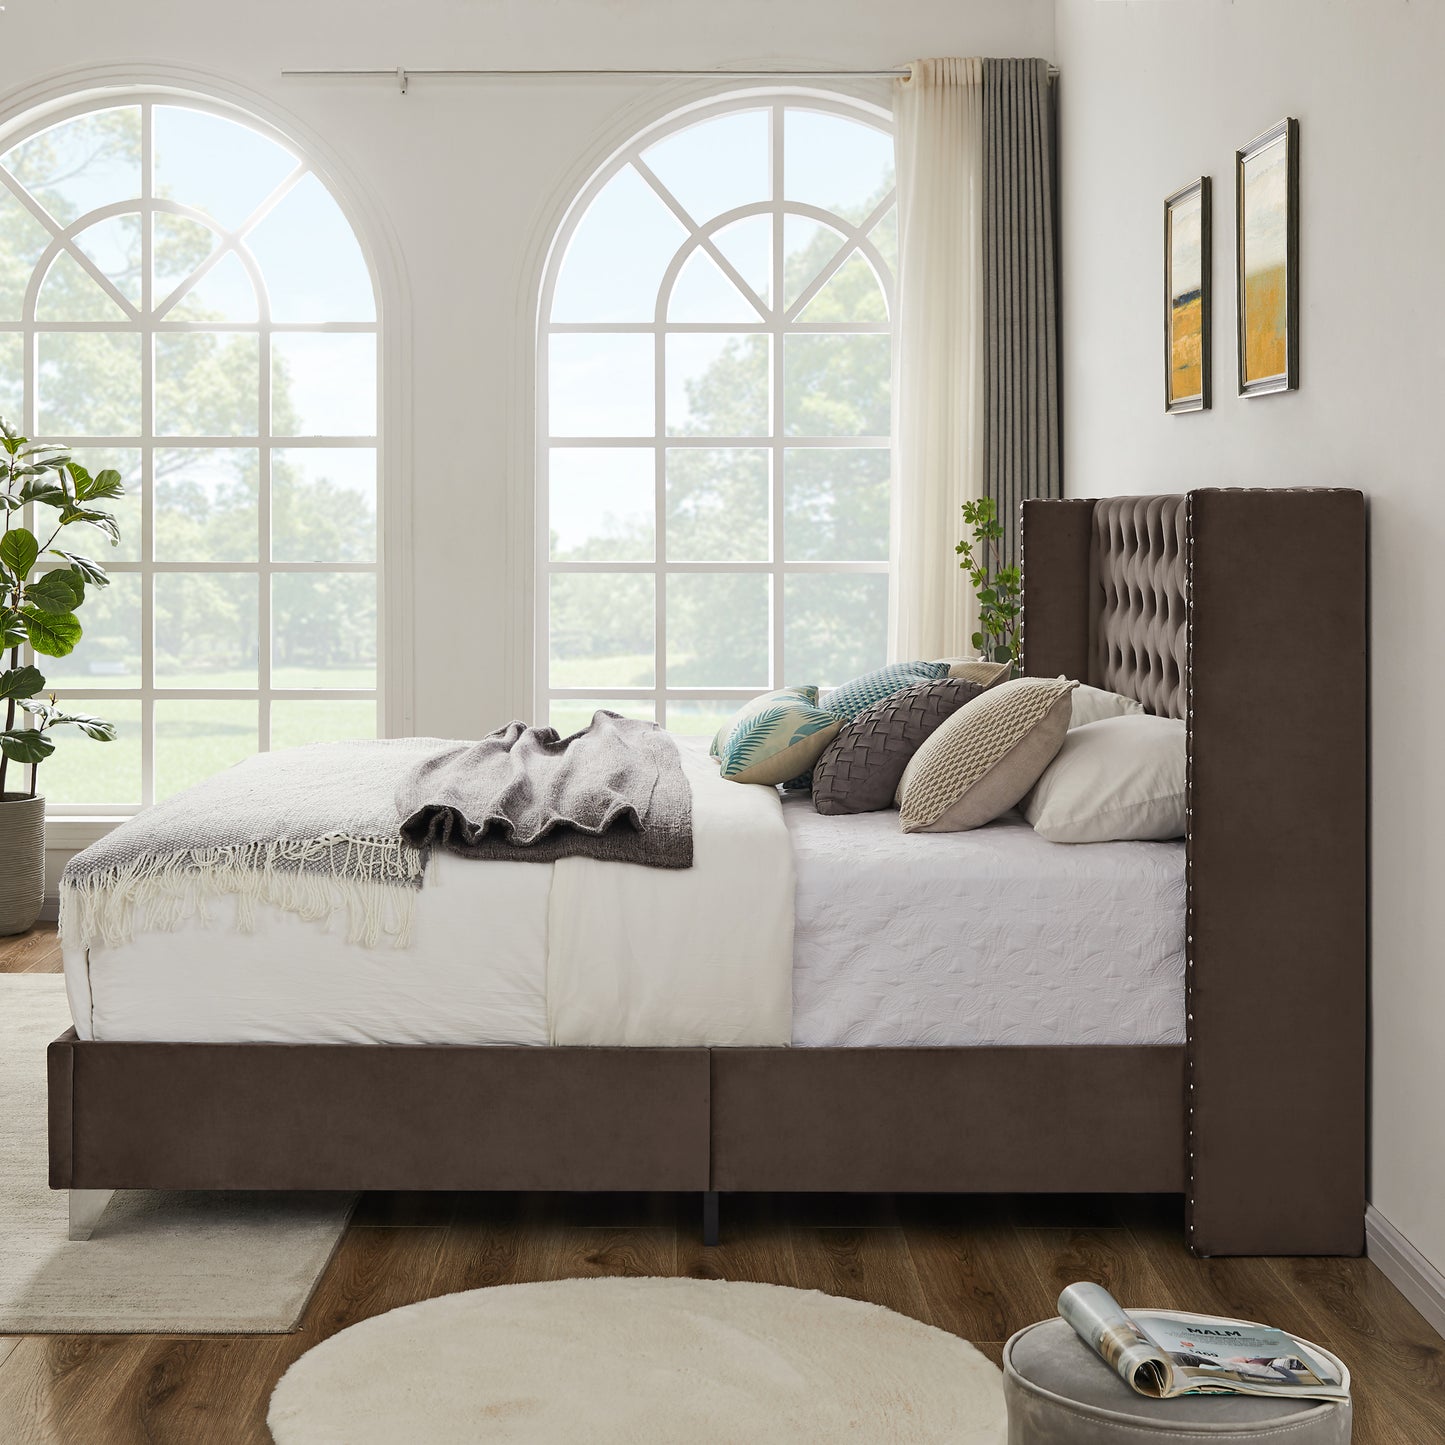 Caine King Bed (brown)